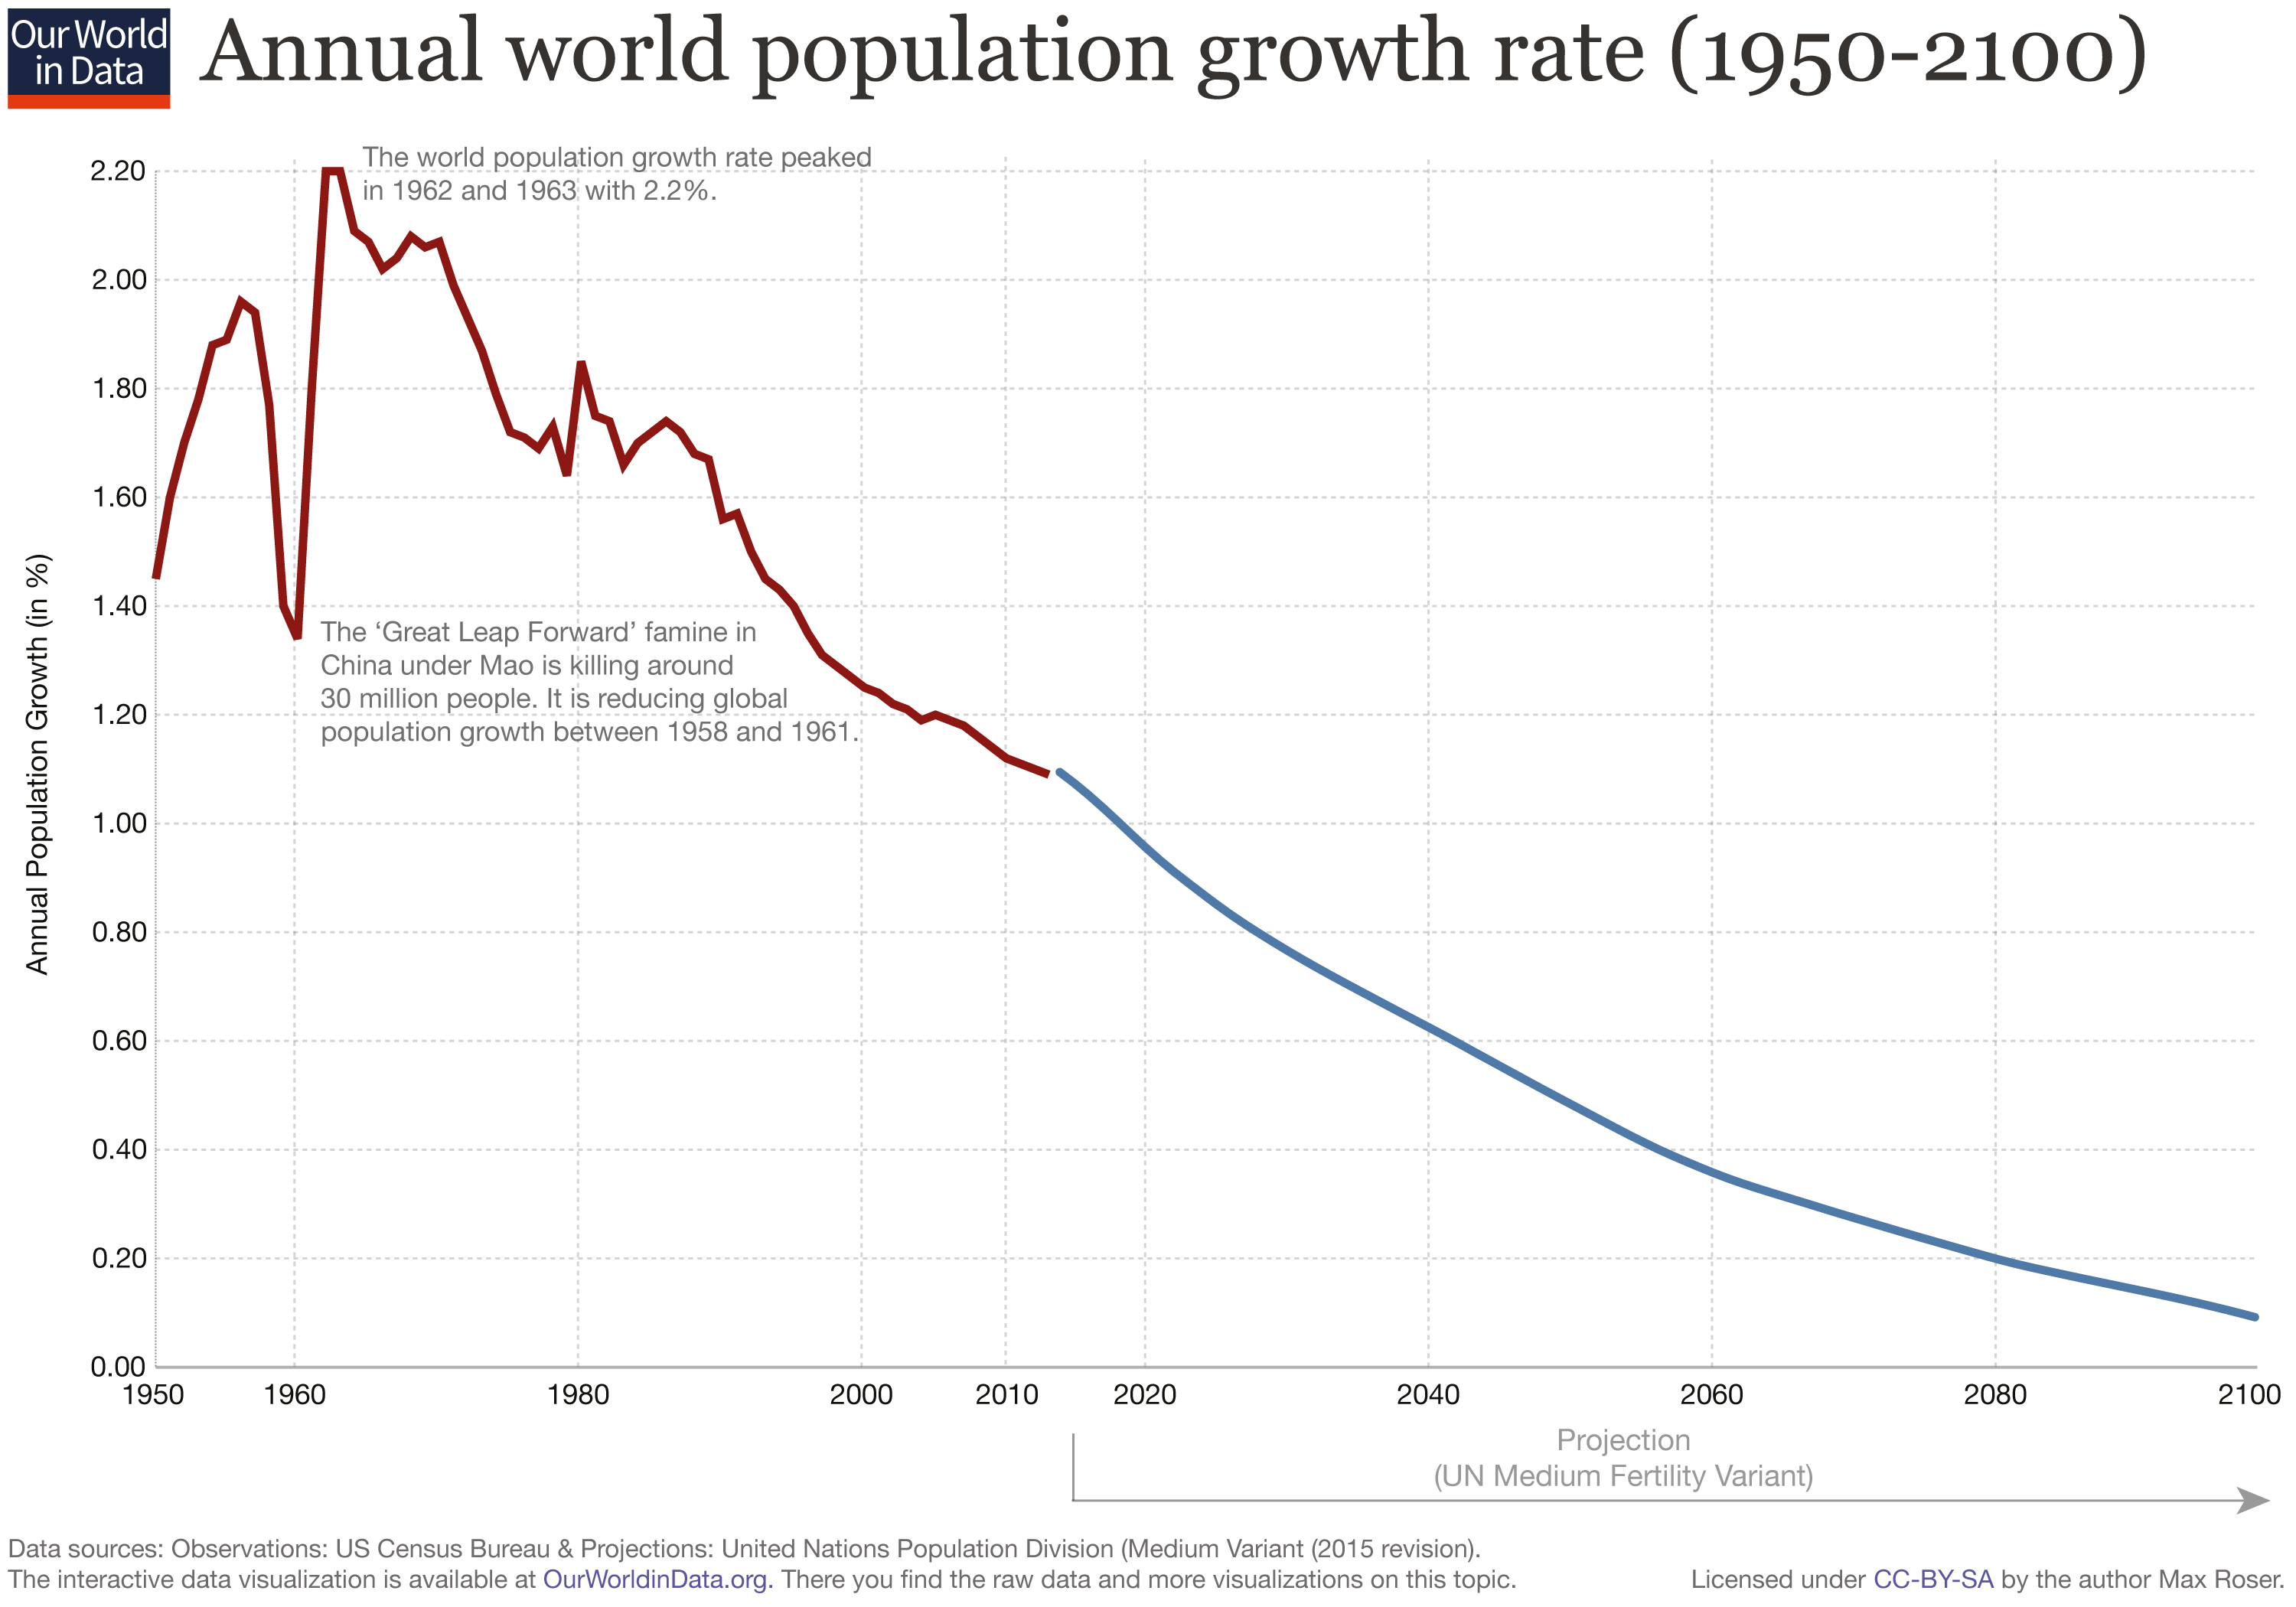 The Myth That Our Planet Faces an Overpopulation Crisis